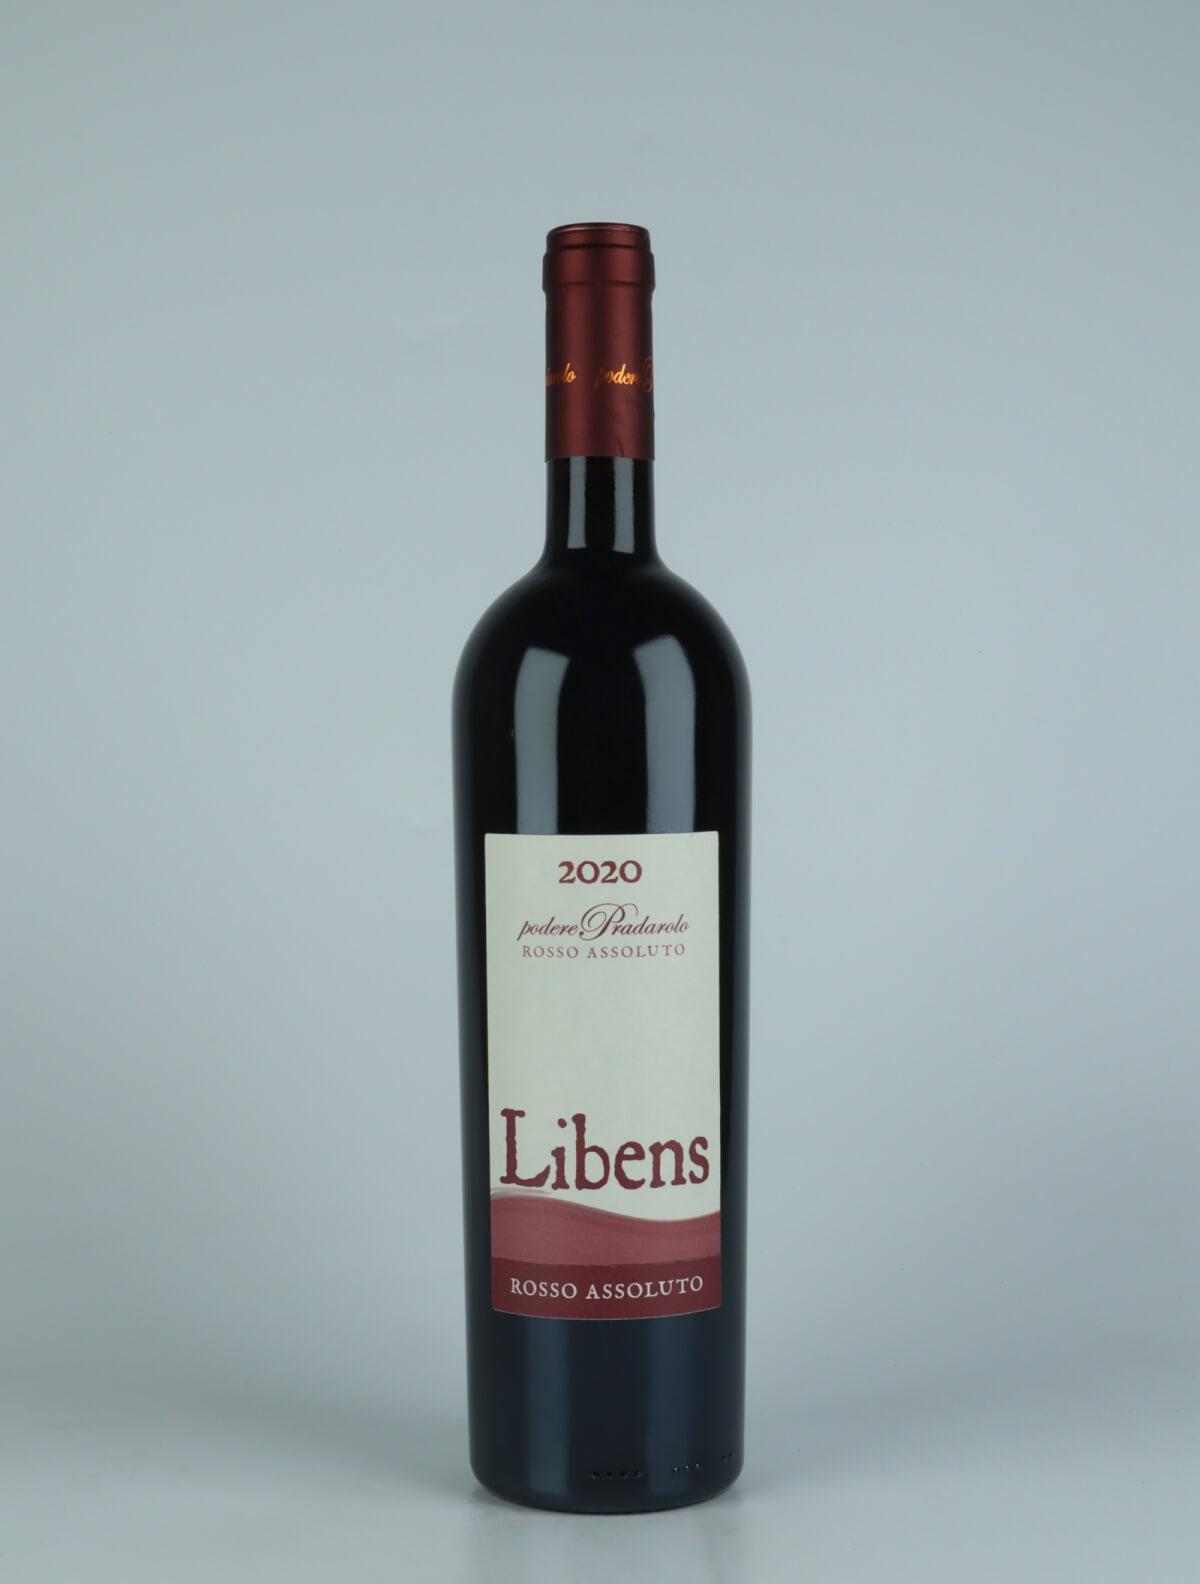 A bottle 2020 Libens - Rosso Assoluto Red wine from Podere Pradarolo, Emilia-Romagna in Italy